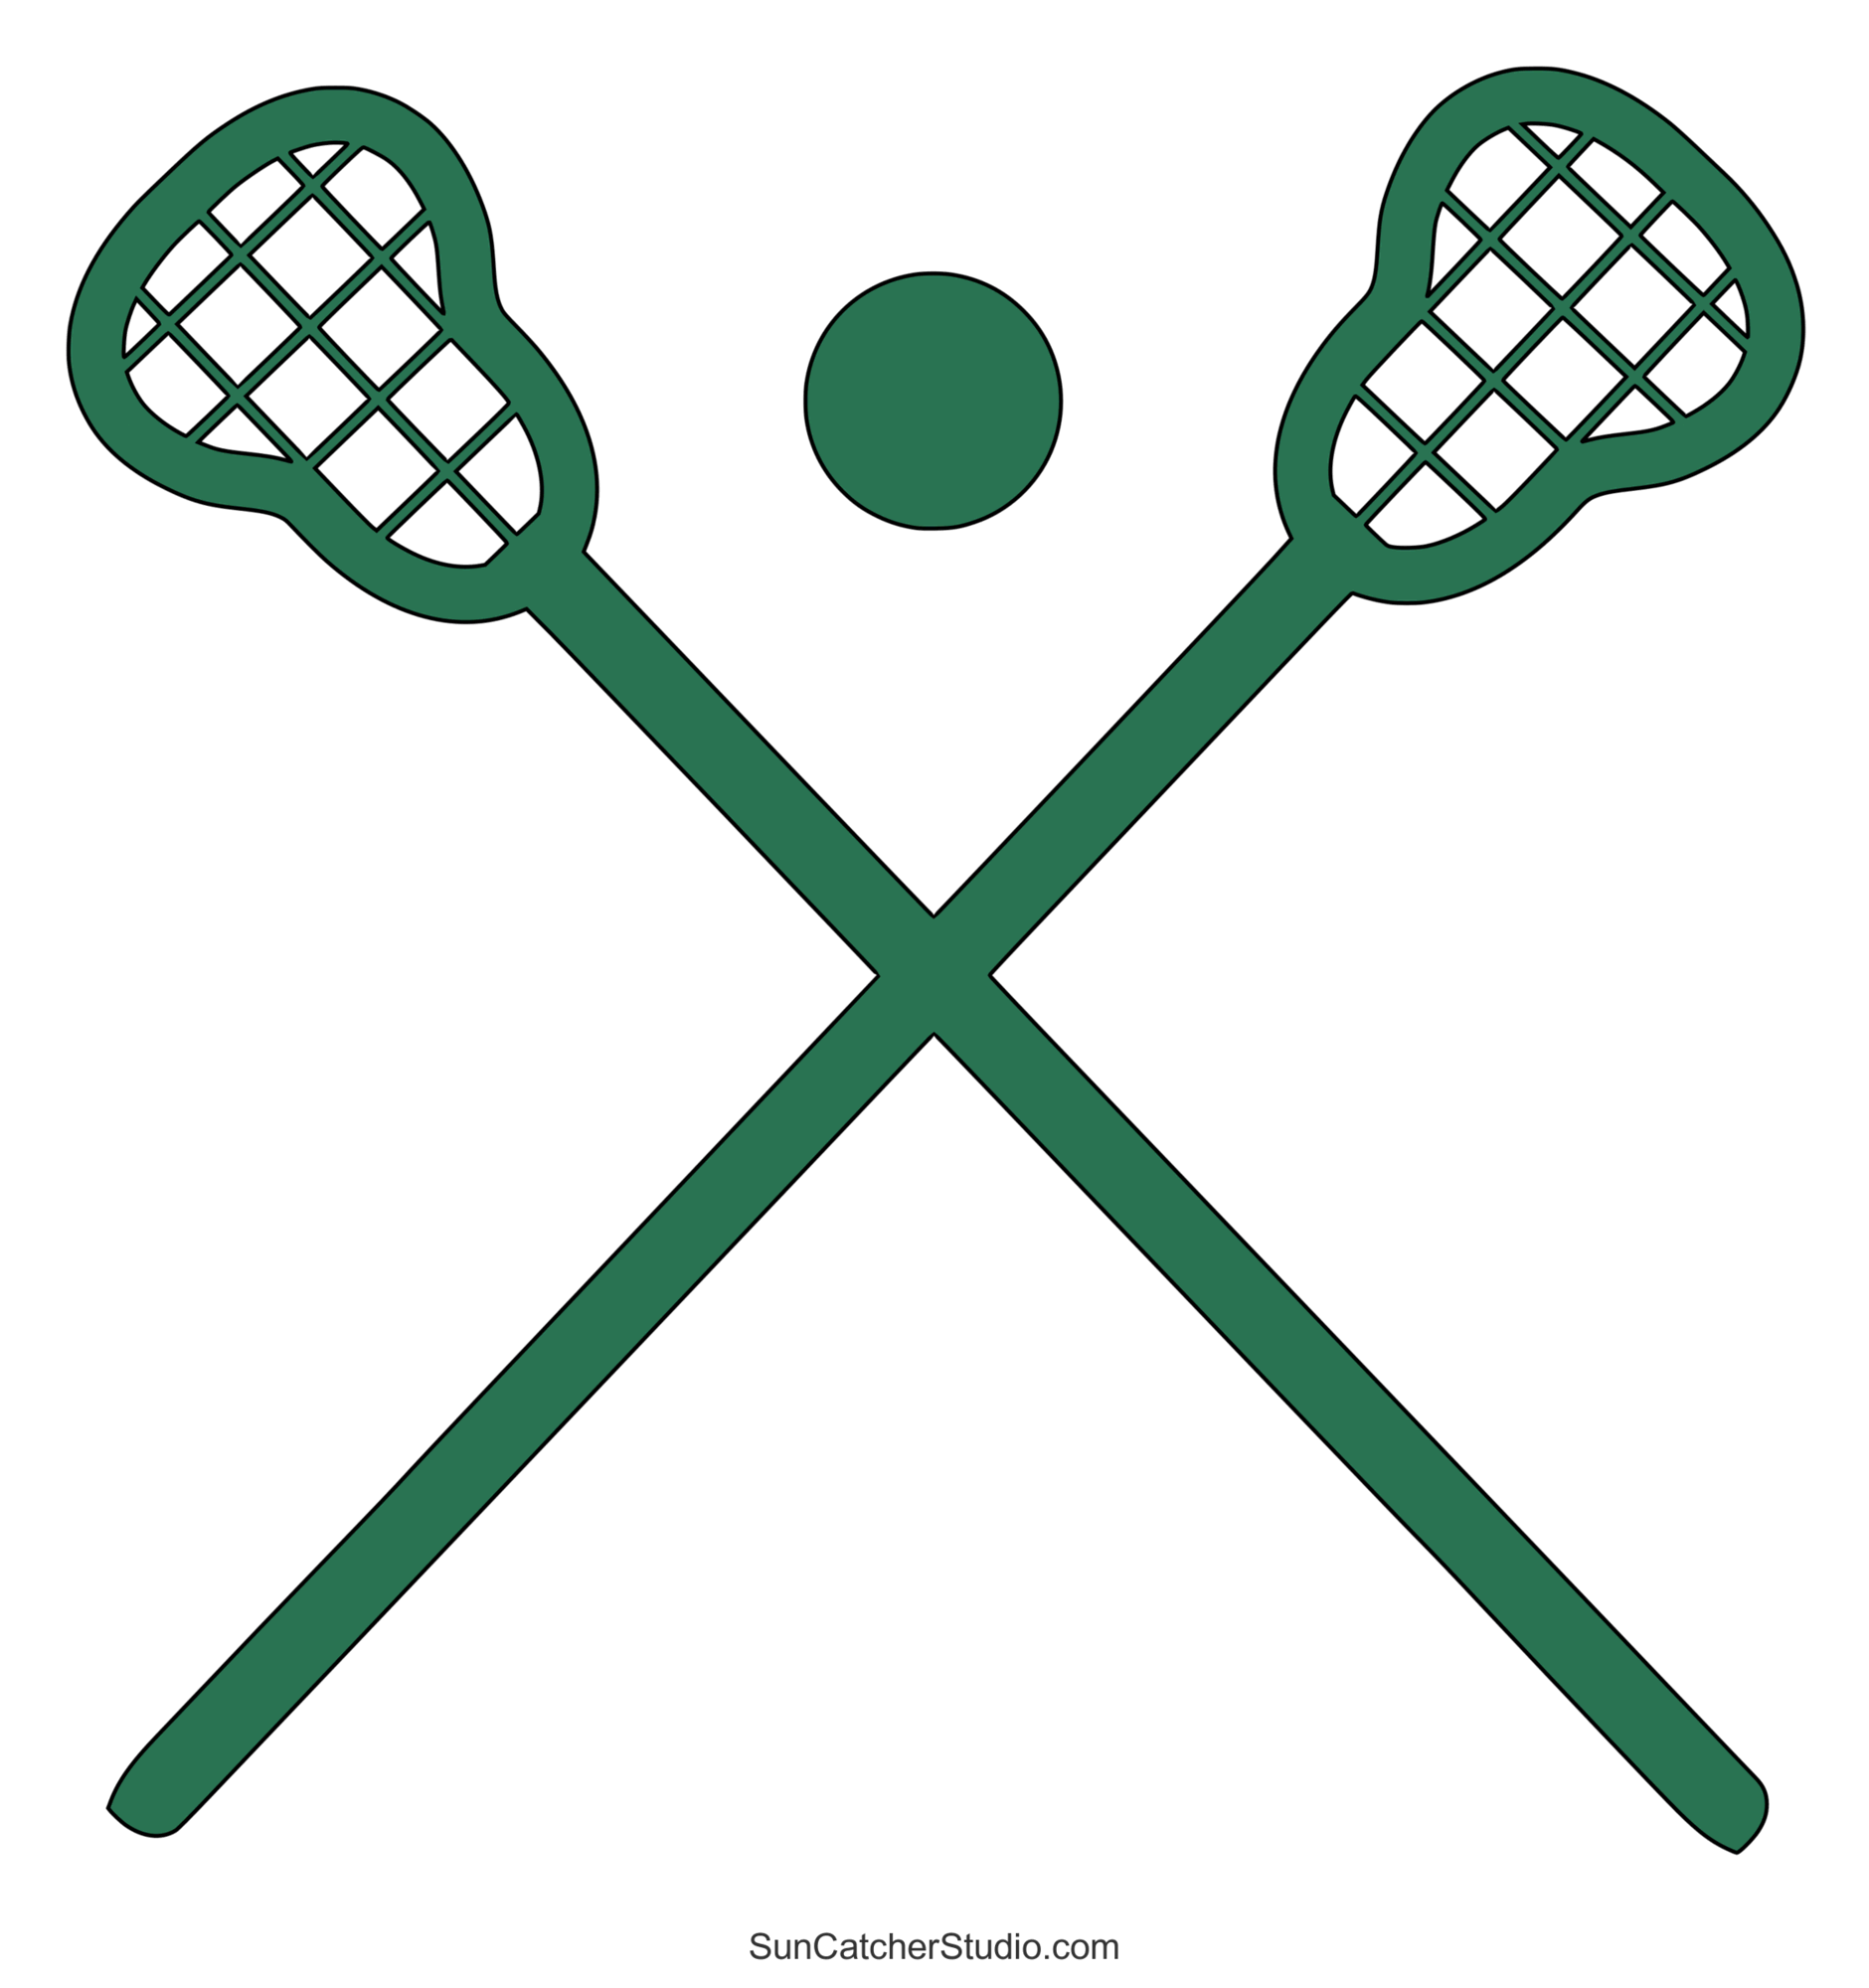 Sports and Ball Patterns and Clip Art (Printable Stencils) – DIY Projects,  Patterns, Monograms, Designs, Templates